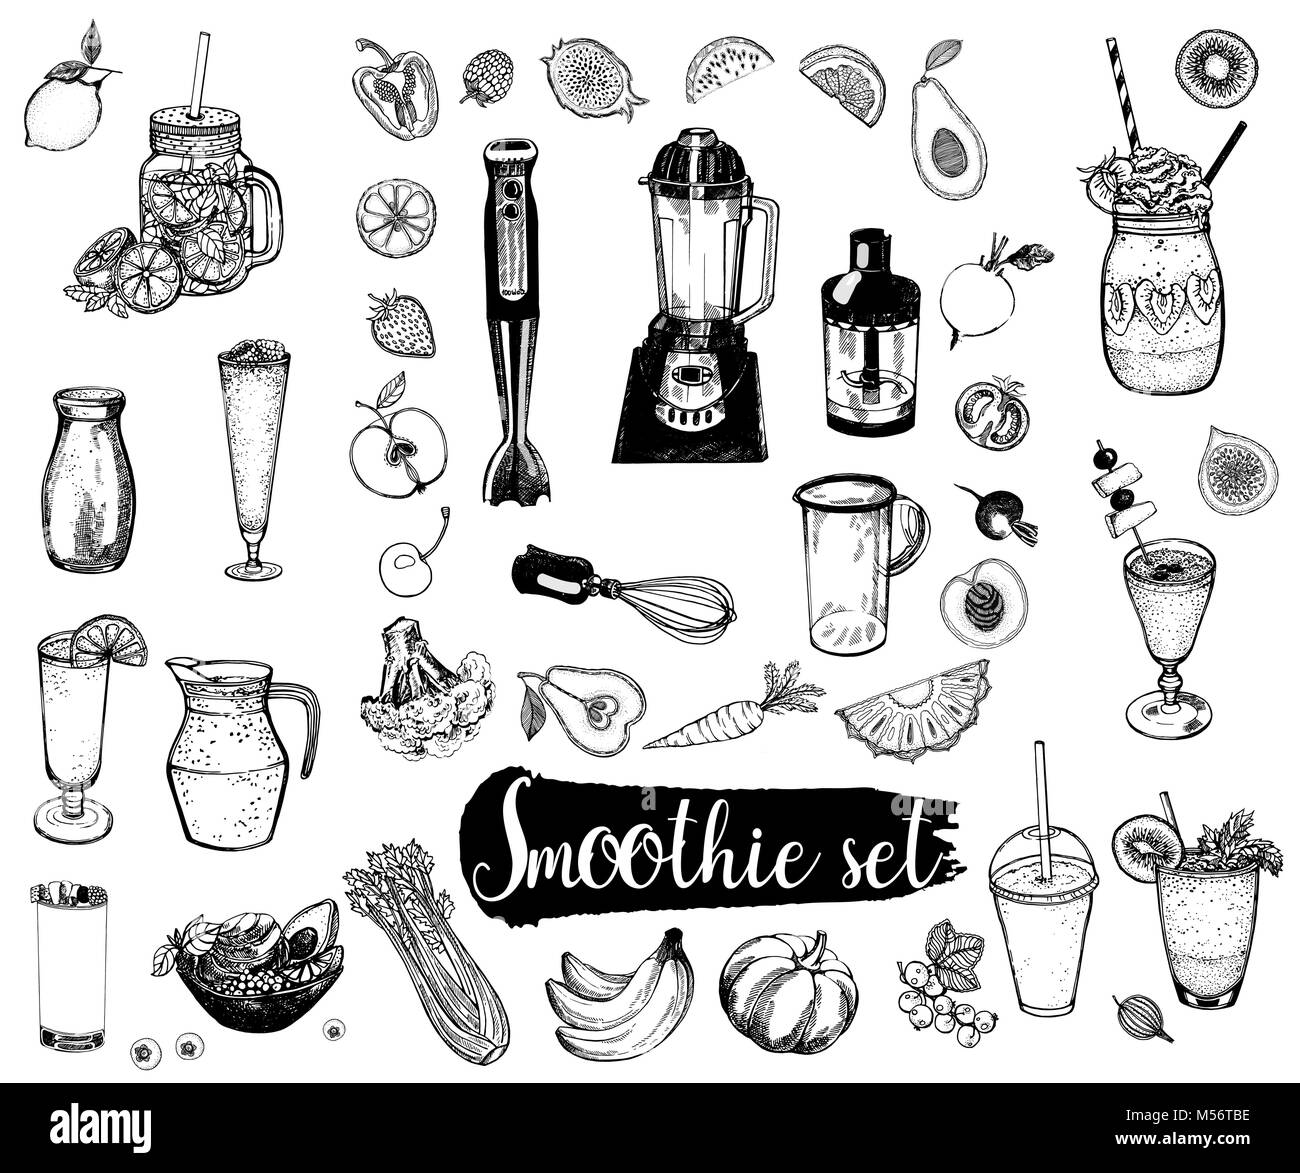 Set of hand drawn sketch style smoothie with fruits, vegetables and kitchenware. Isolated vector illustration. Stock Vector